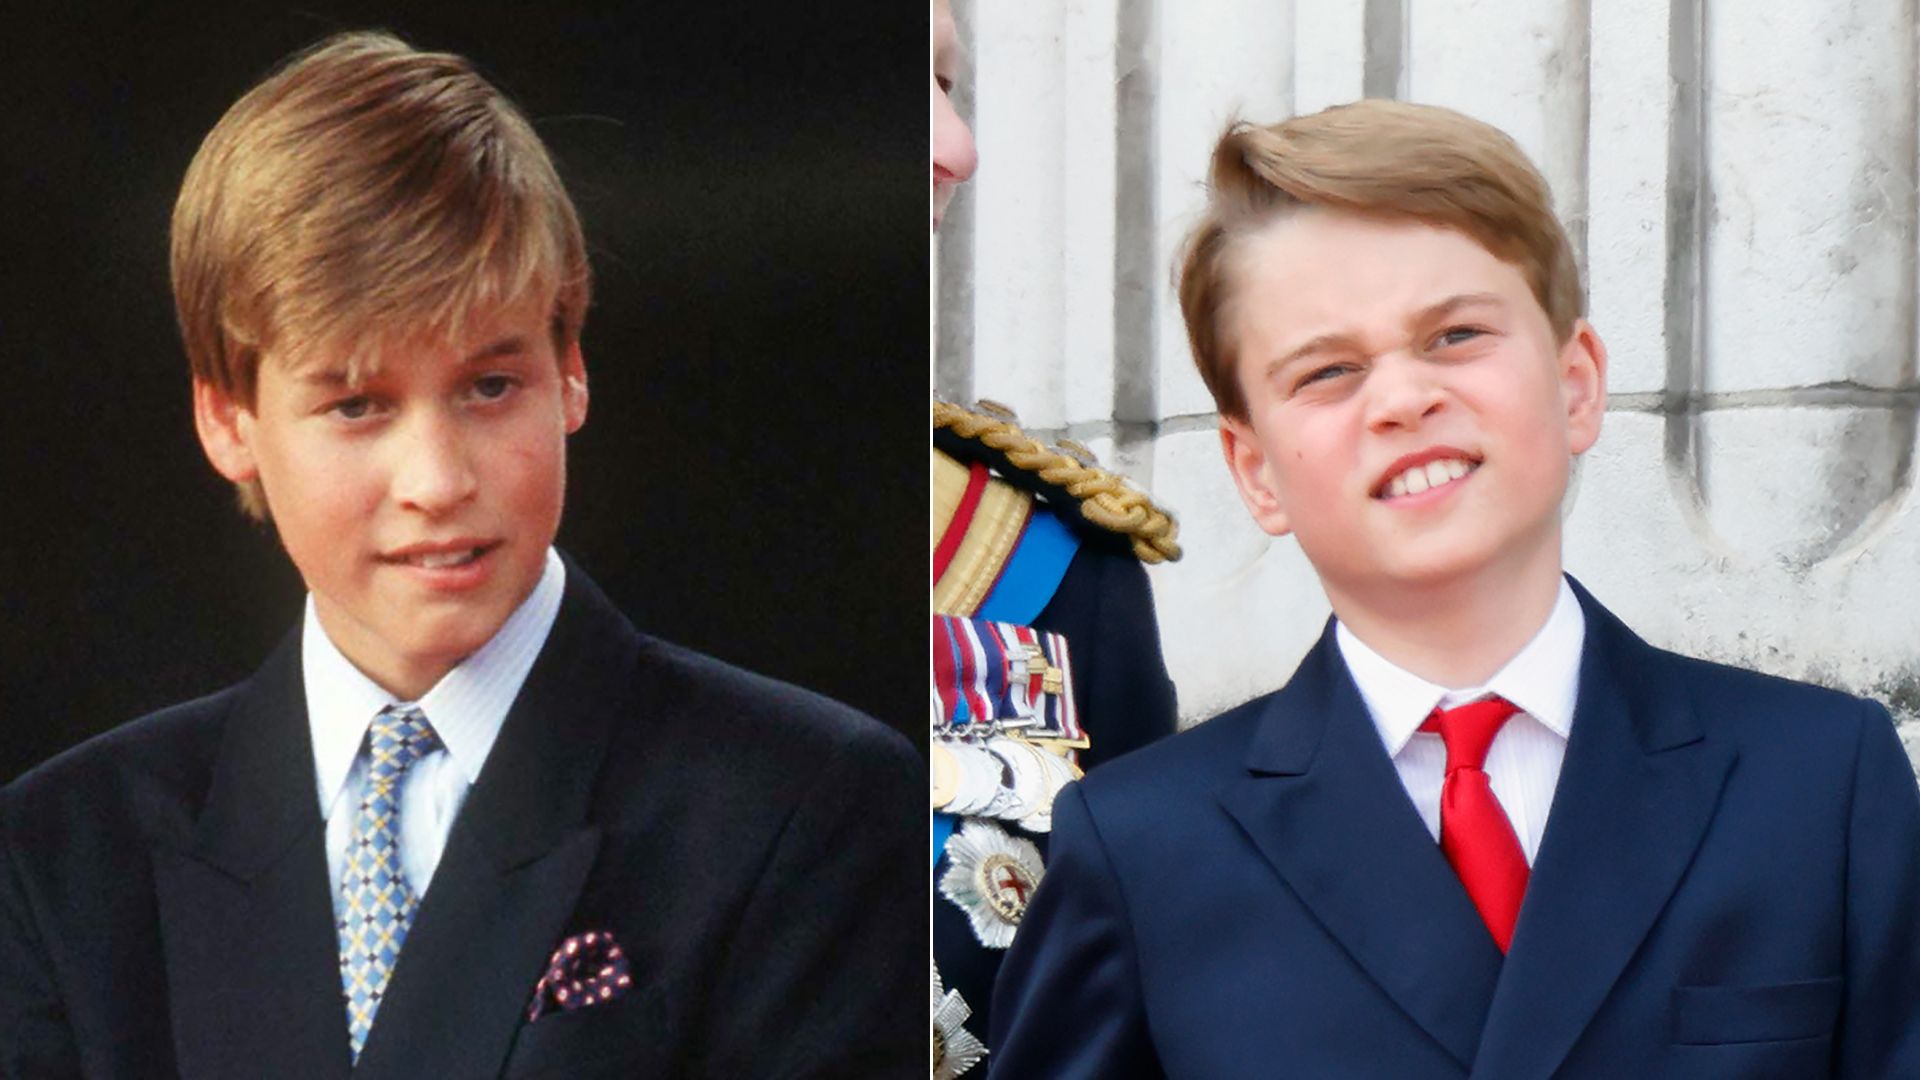 Prince William is the spitting image of his son Prince George